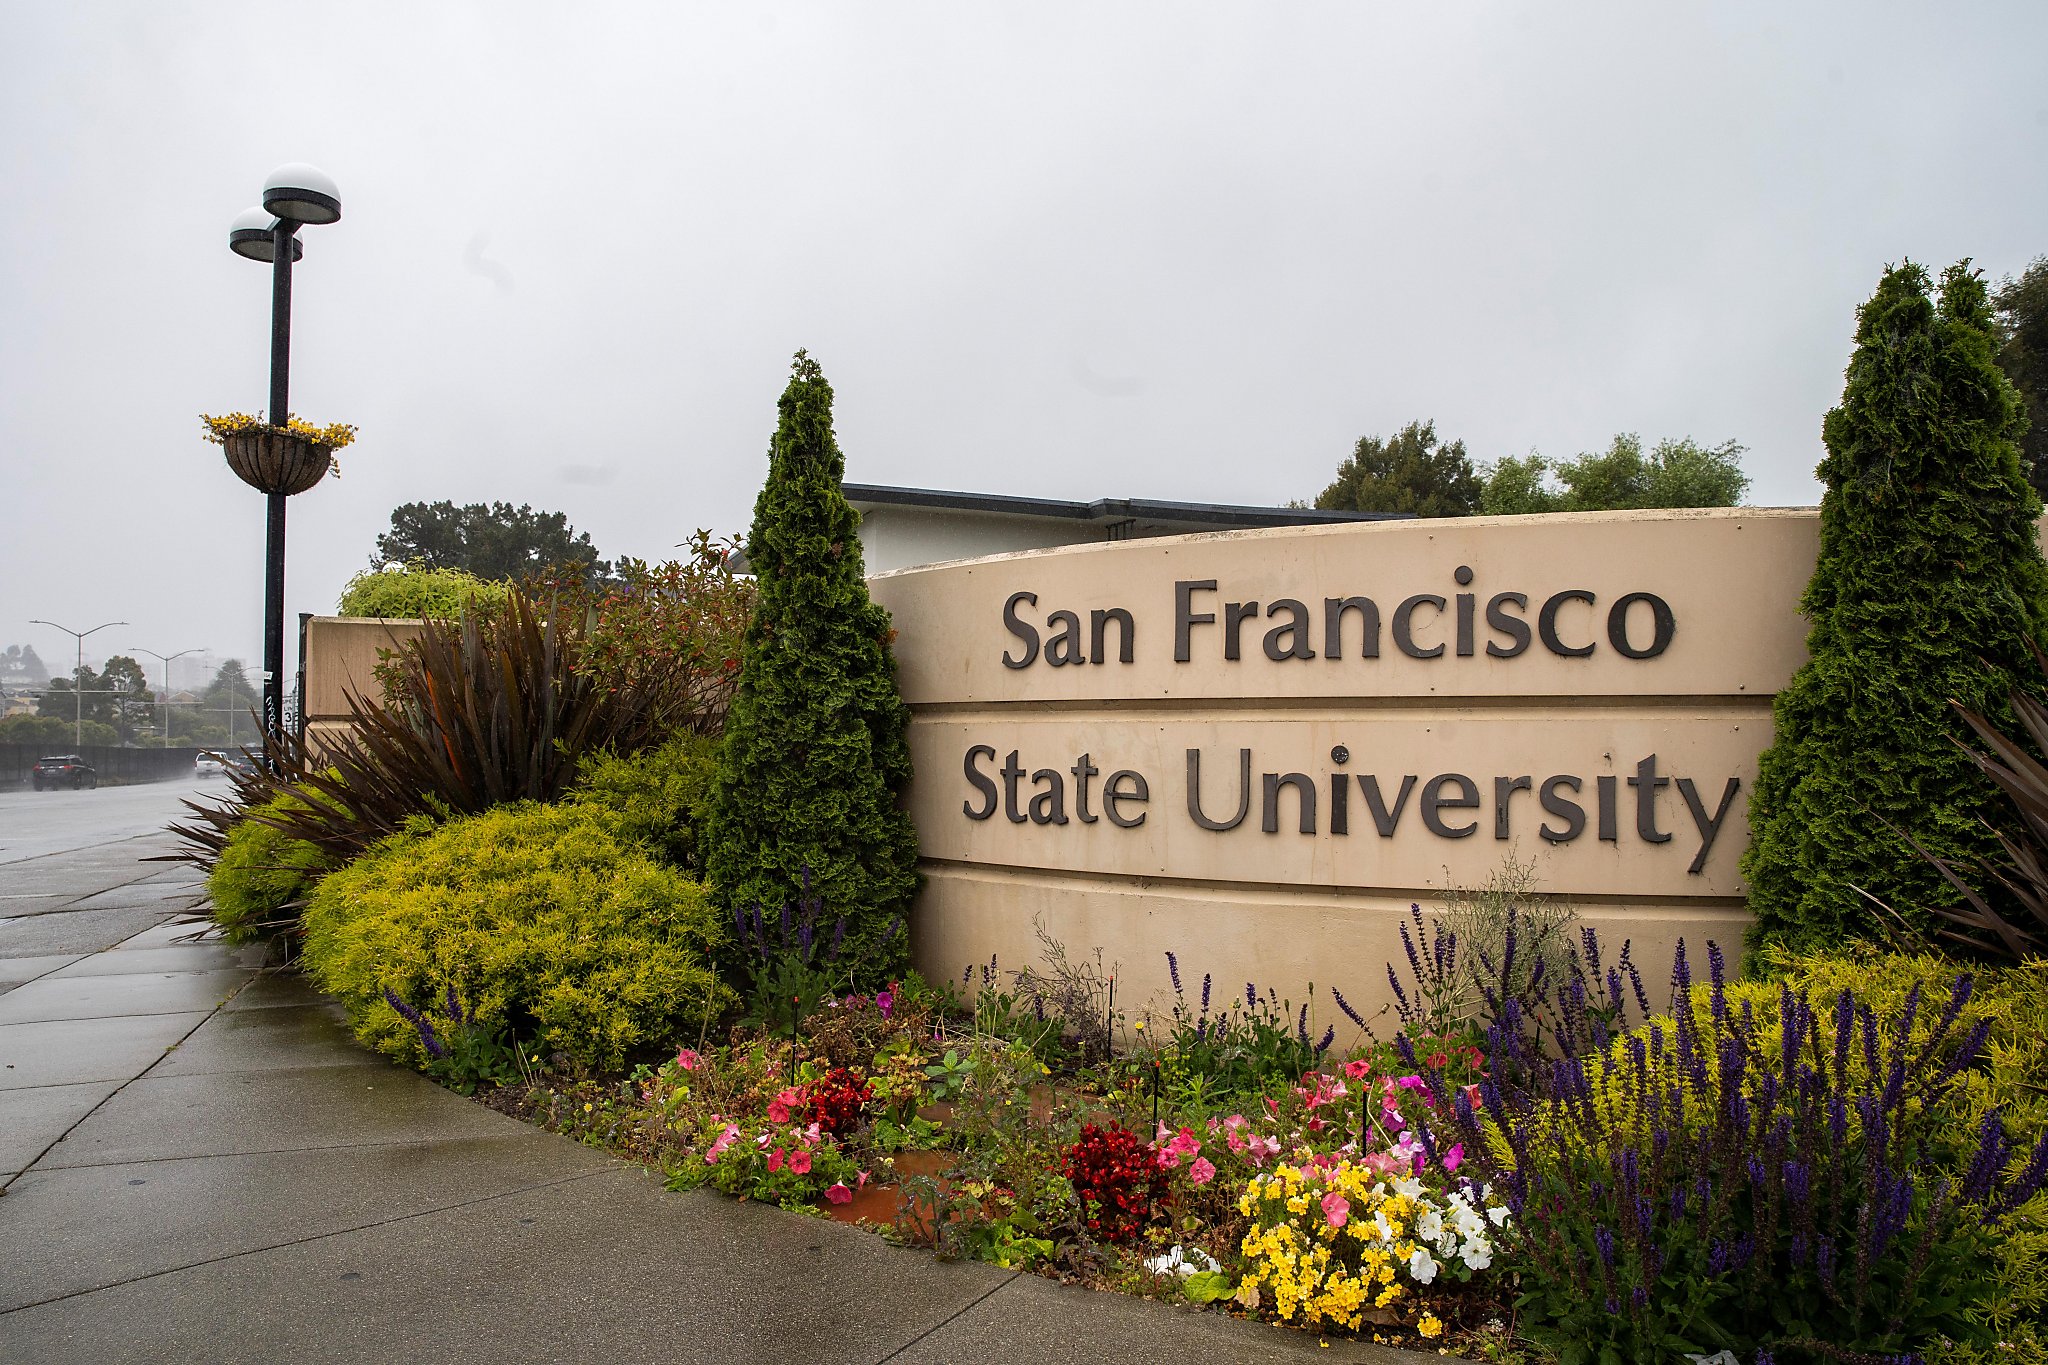 San Francisco State University Summer Programs For High School Students